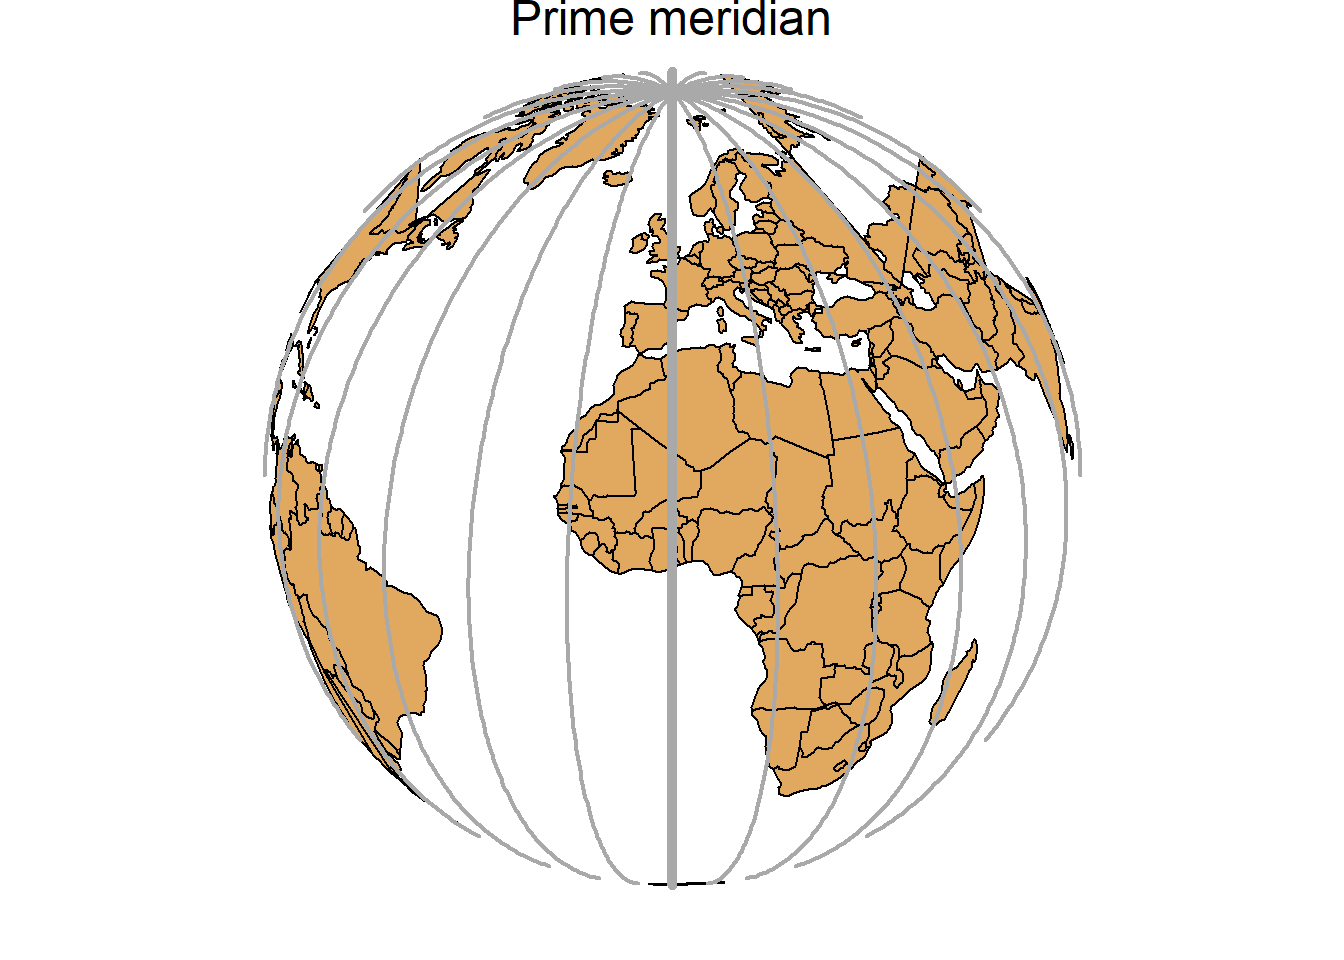 Parallels (left) and meridians (right).